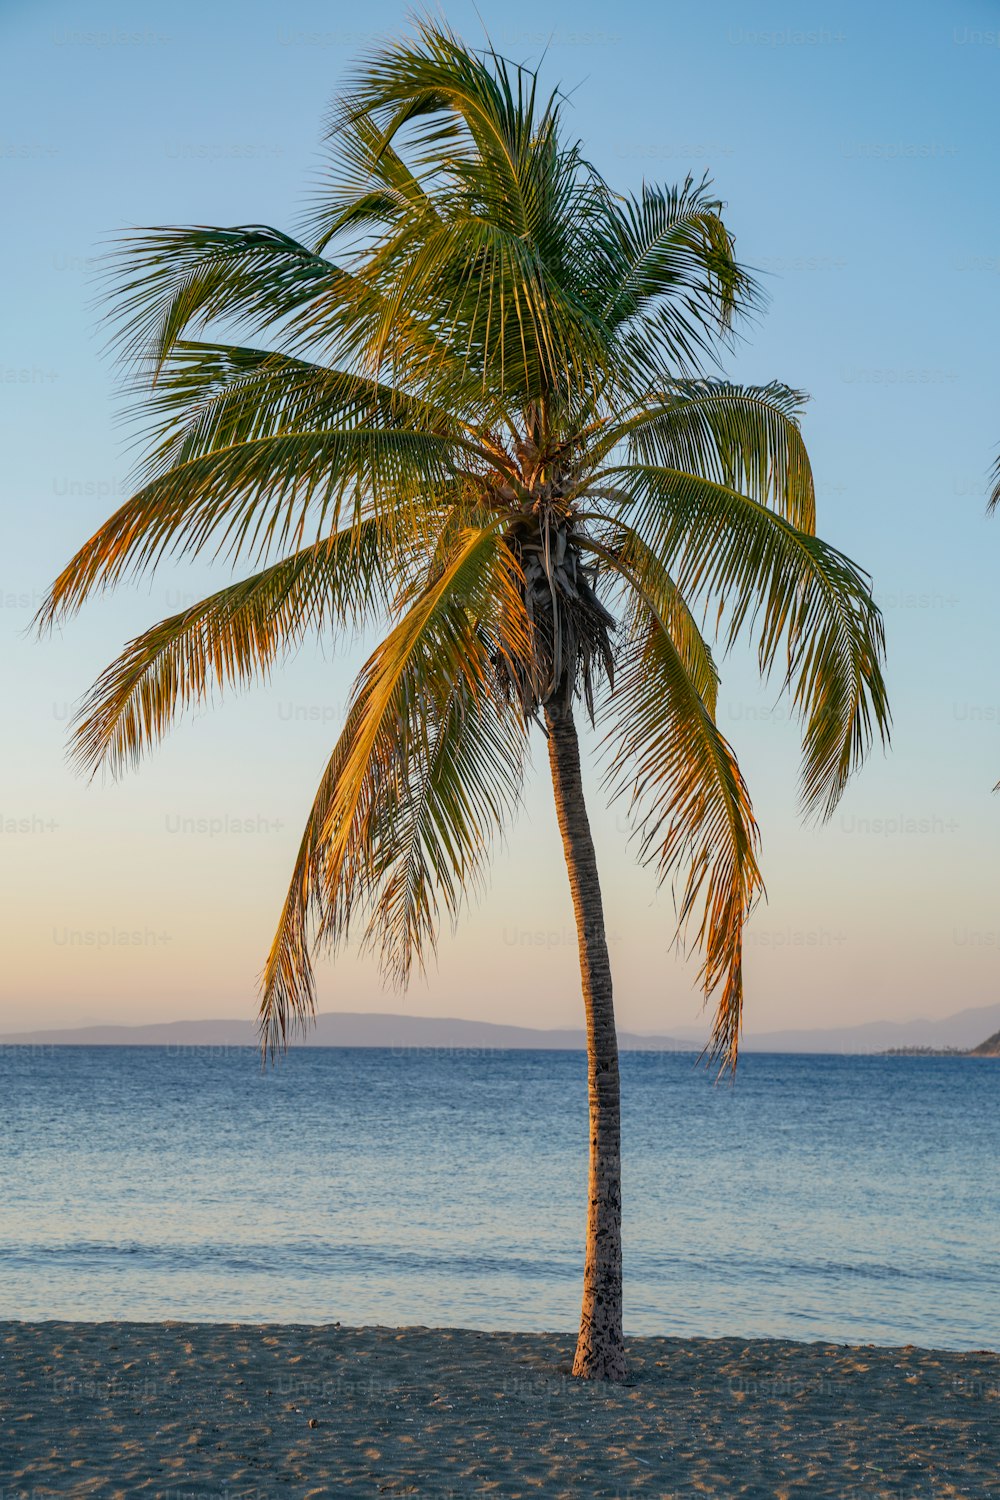 a palm tree on a beach with the ocean in the background